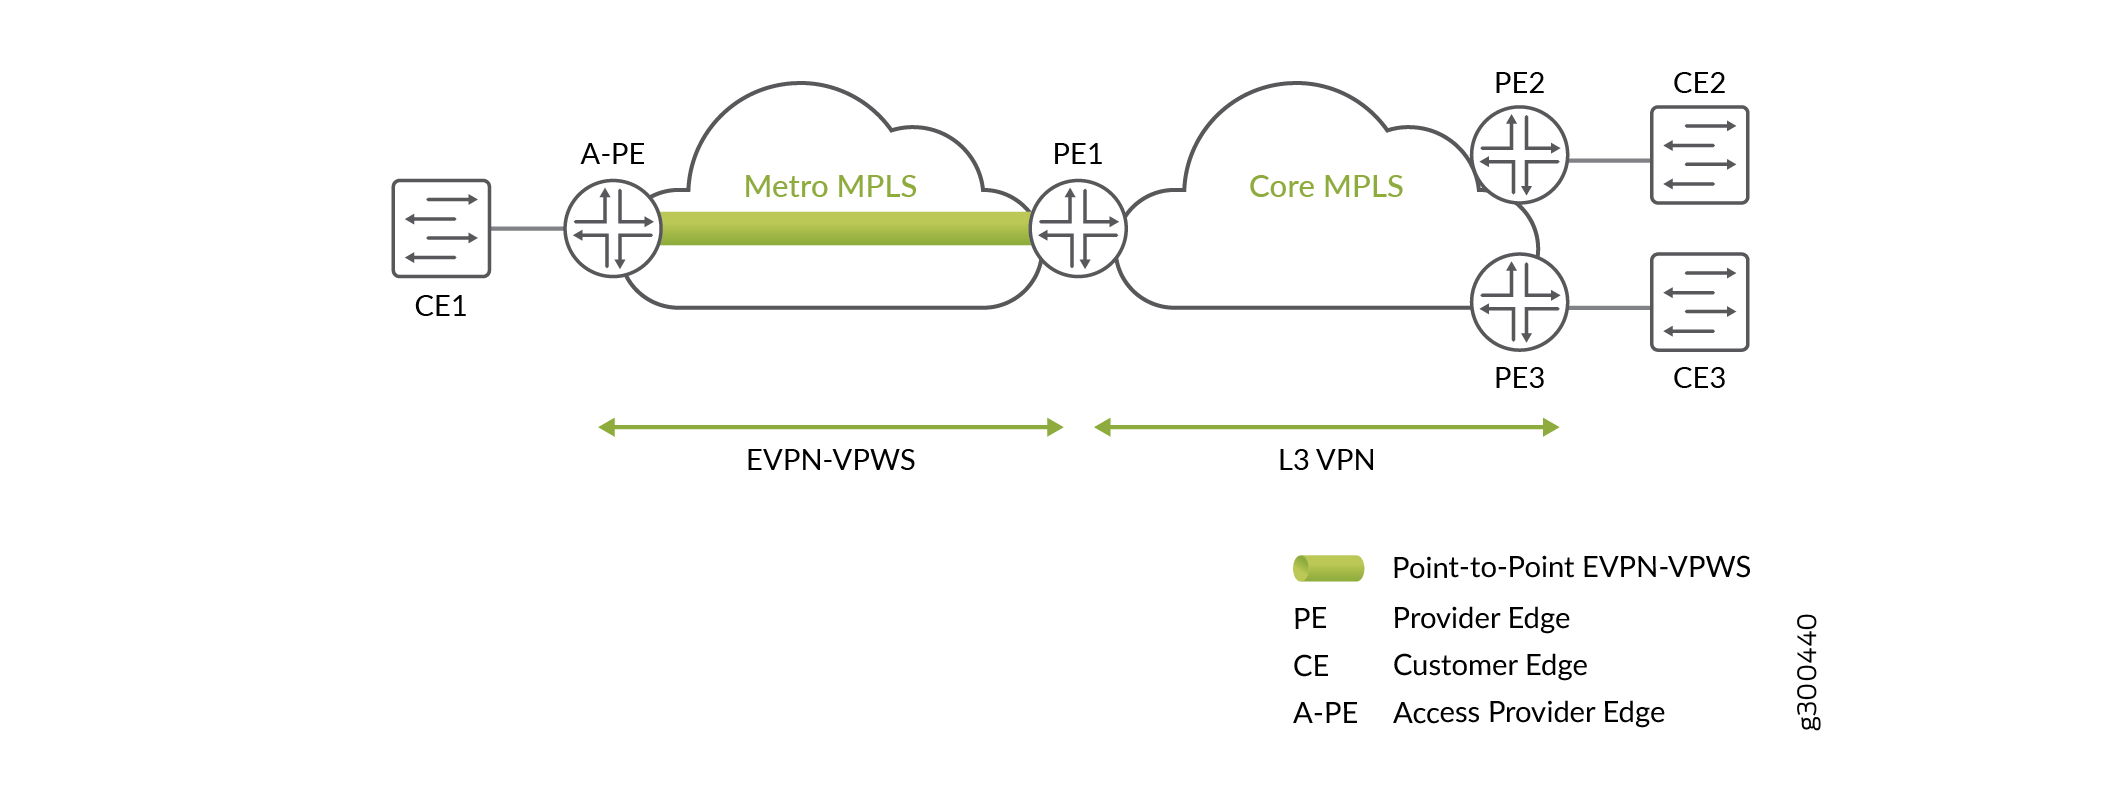 Single-homed network with EVPN-VPWS service terminating in a Layer 3 VPN